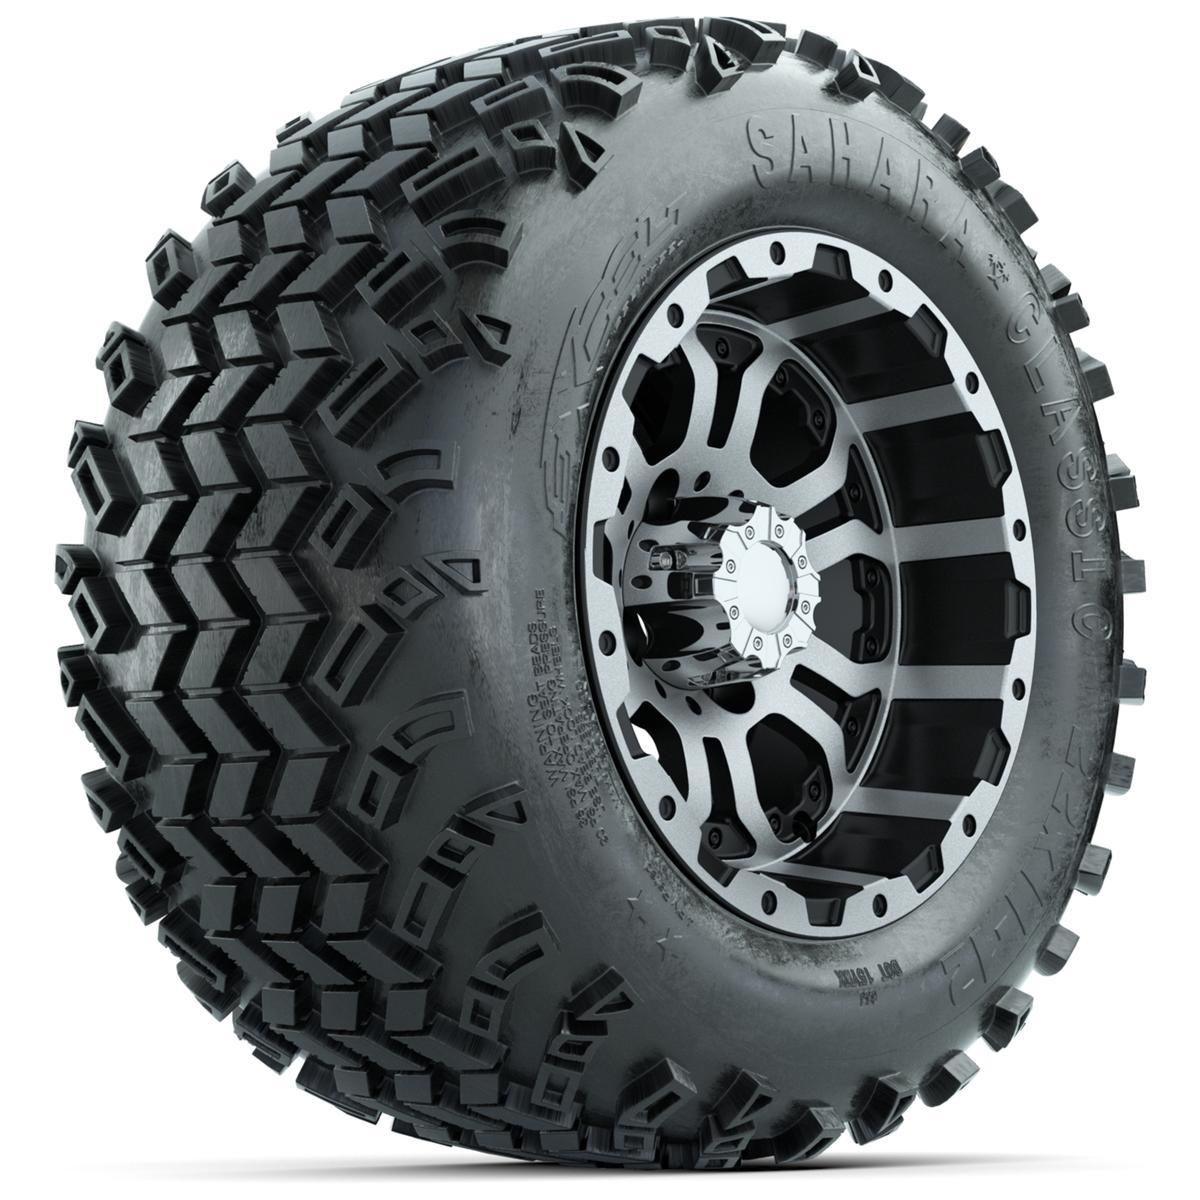 Set of (4) 12 in GTW Omega Wheels with 22x11-12 Sahara Classic All-Terrain Tires